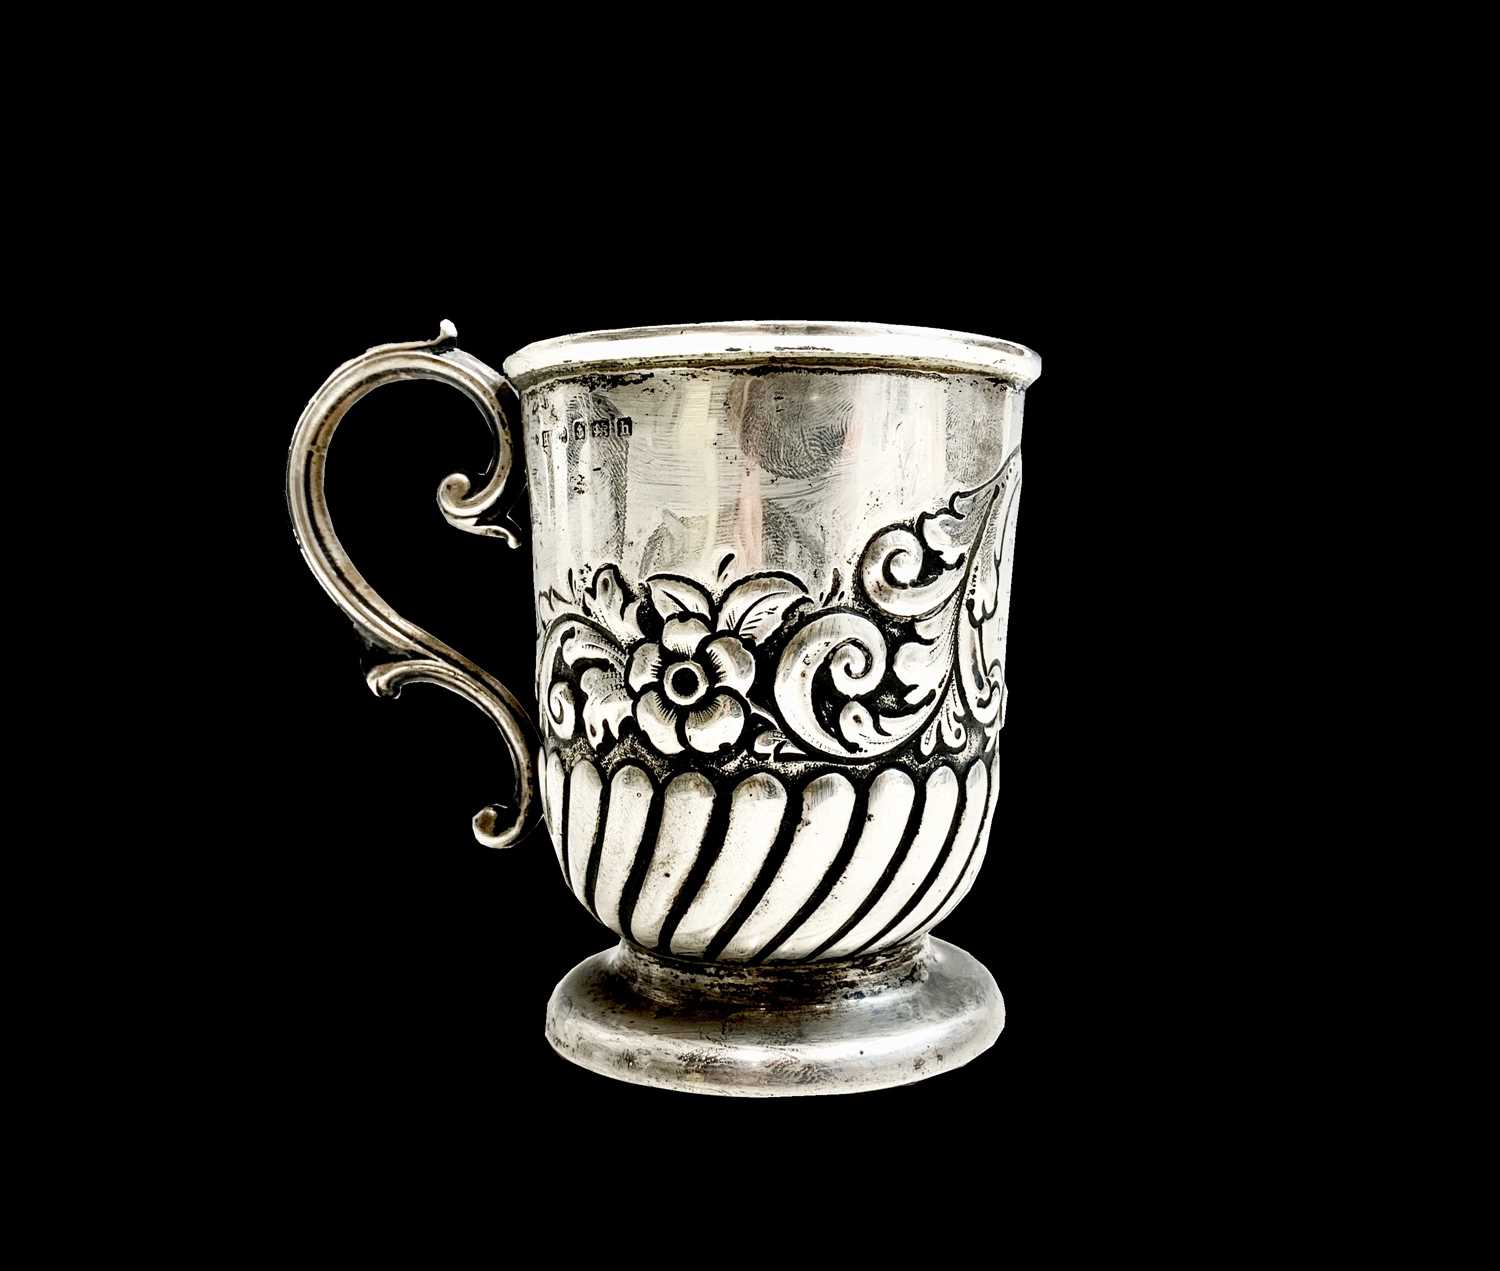 An Edwardian silver christening mug, half spiral fluted and embossed with flowers and scrolls.